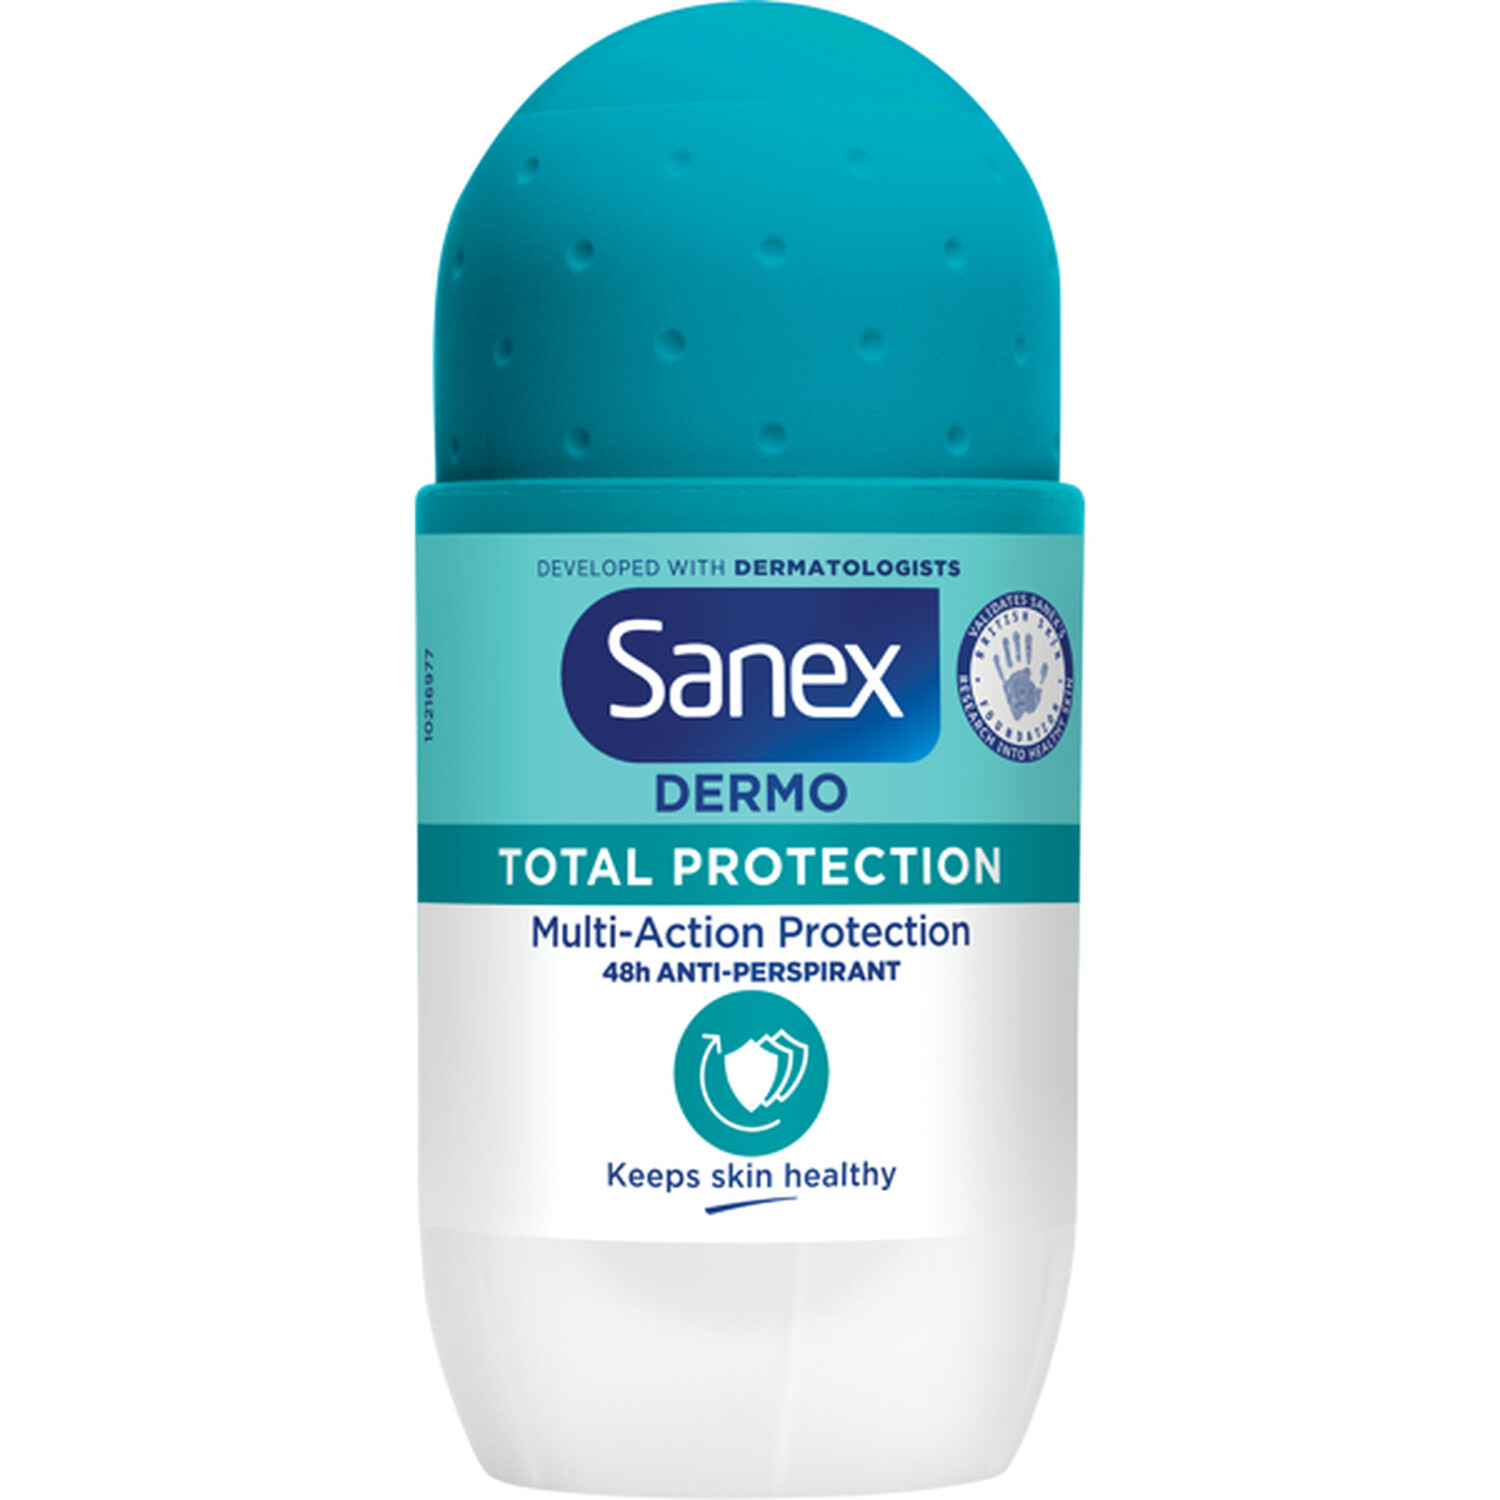 Sanex Dermo Total Protection Roll-On Antiperspirant 50ml - Blue Image